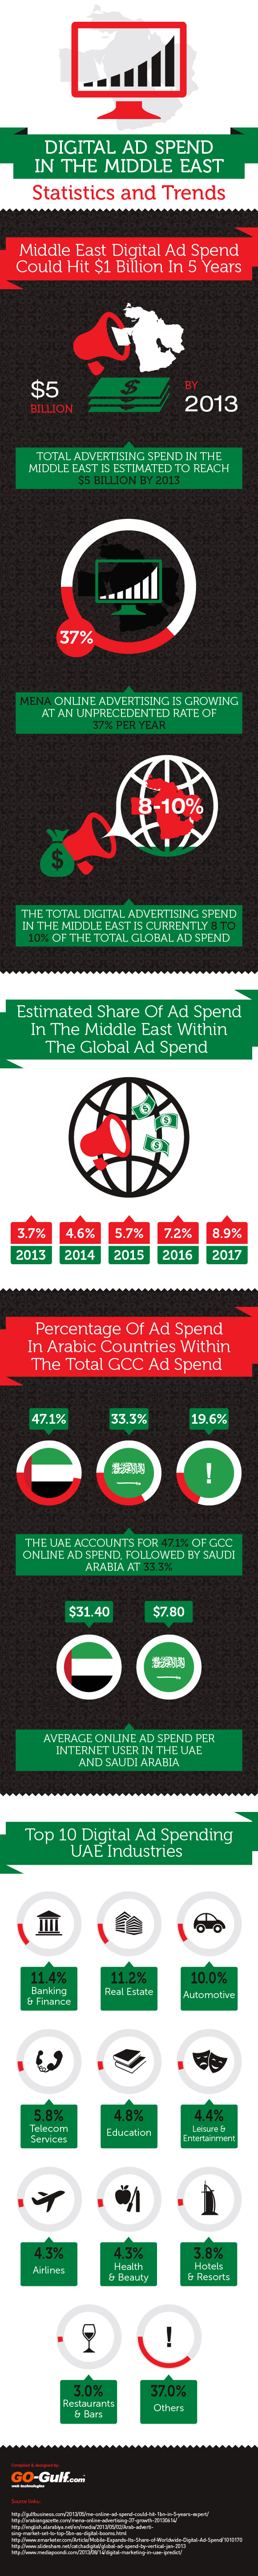 Digital AD Spend In The Middle East Statistics And Trends